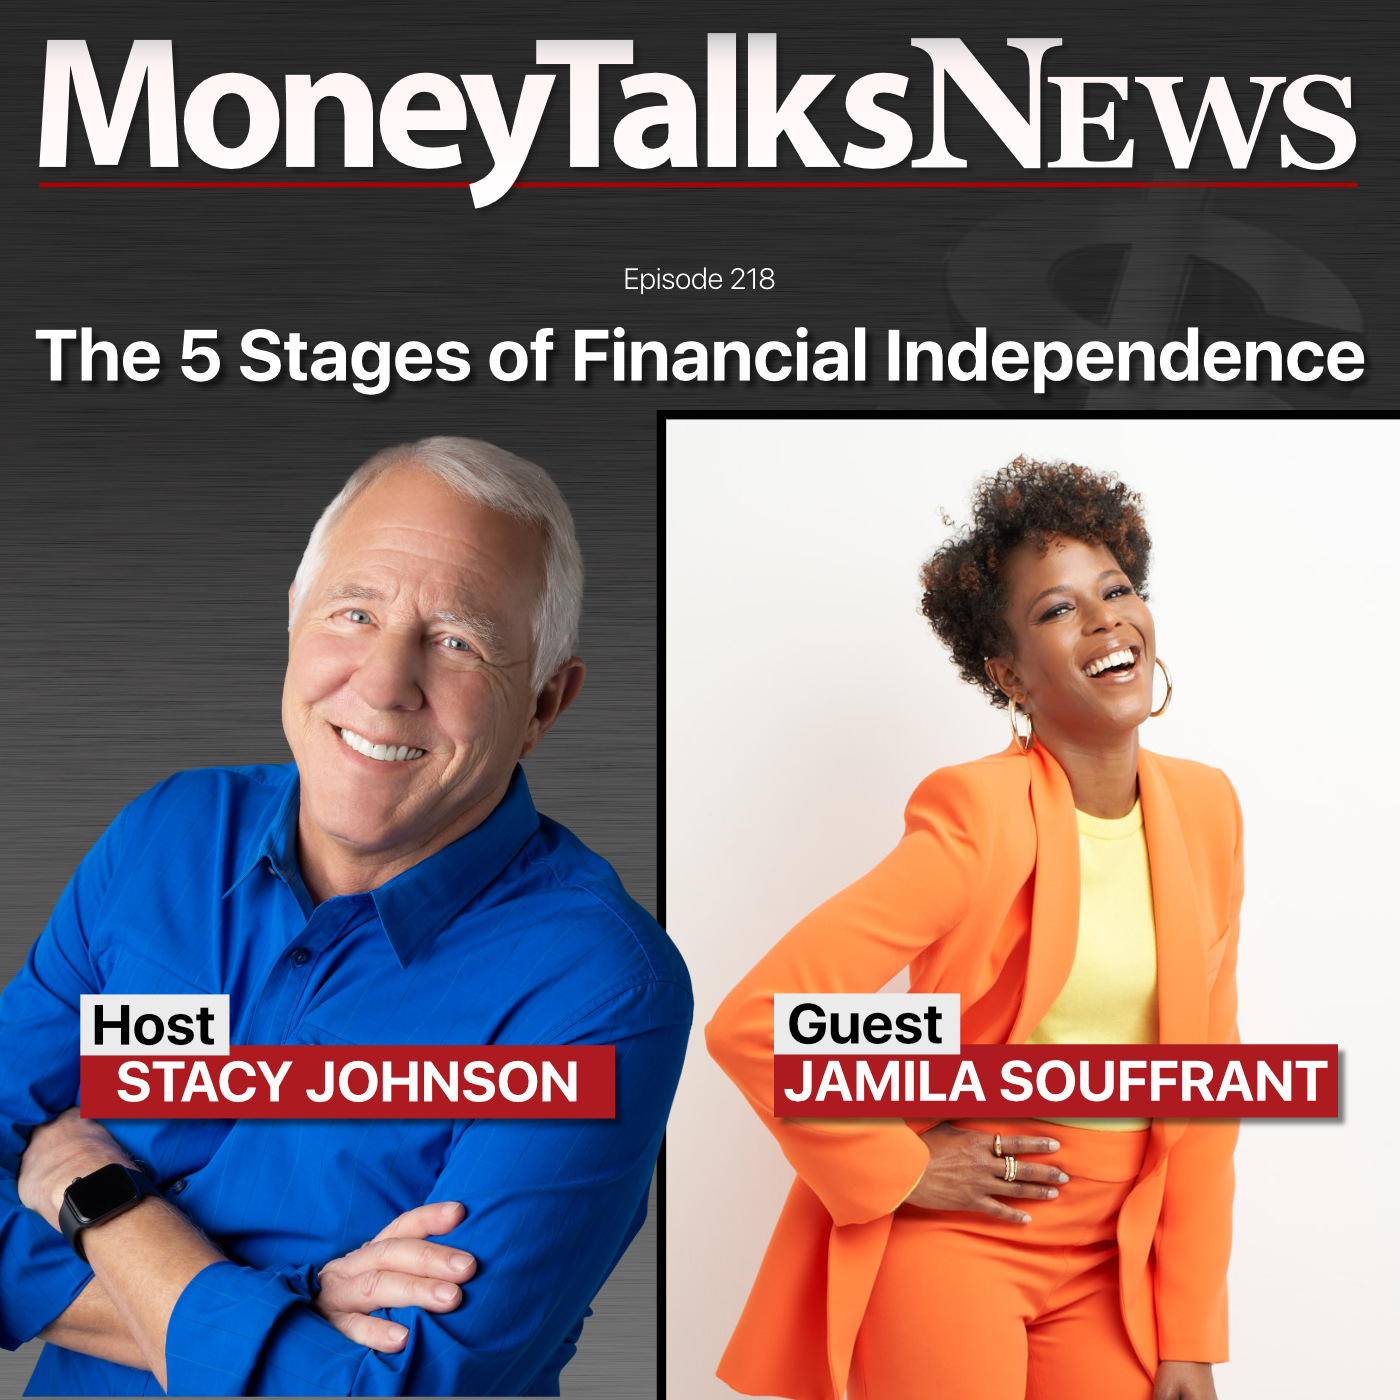 The 5 Stages of Financial Independence